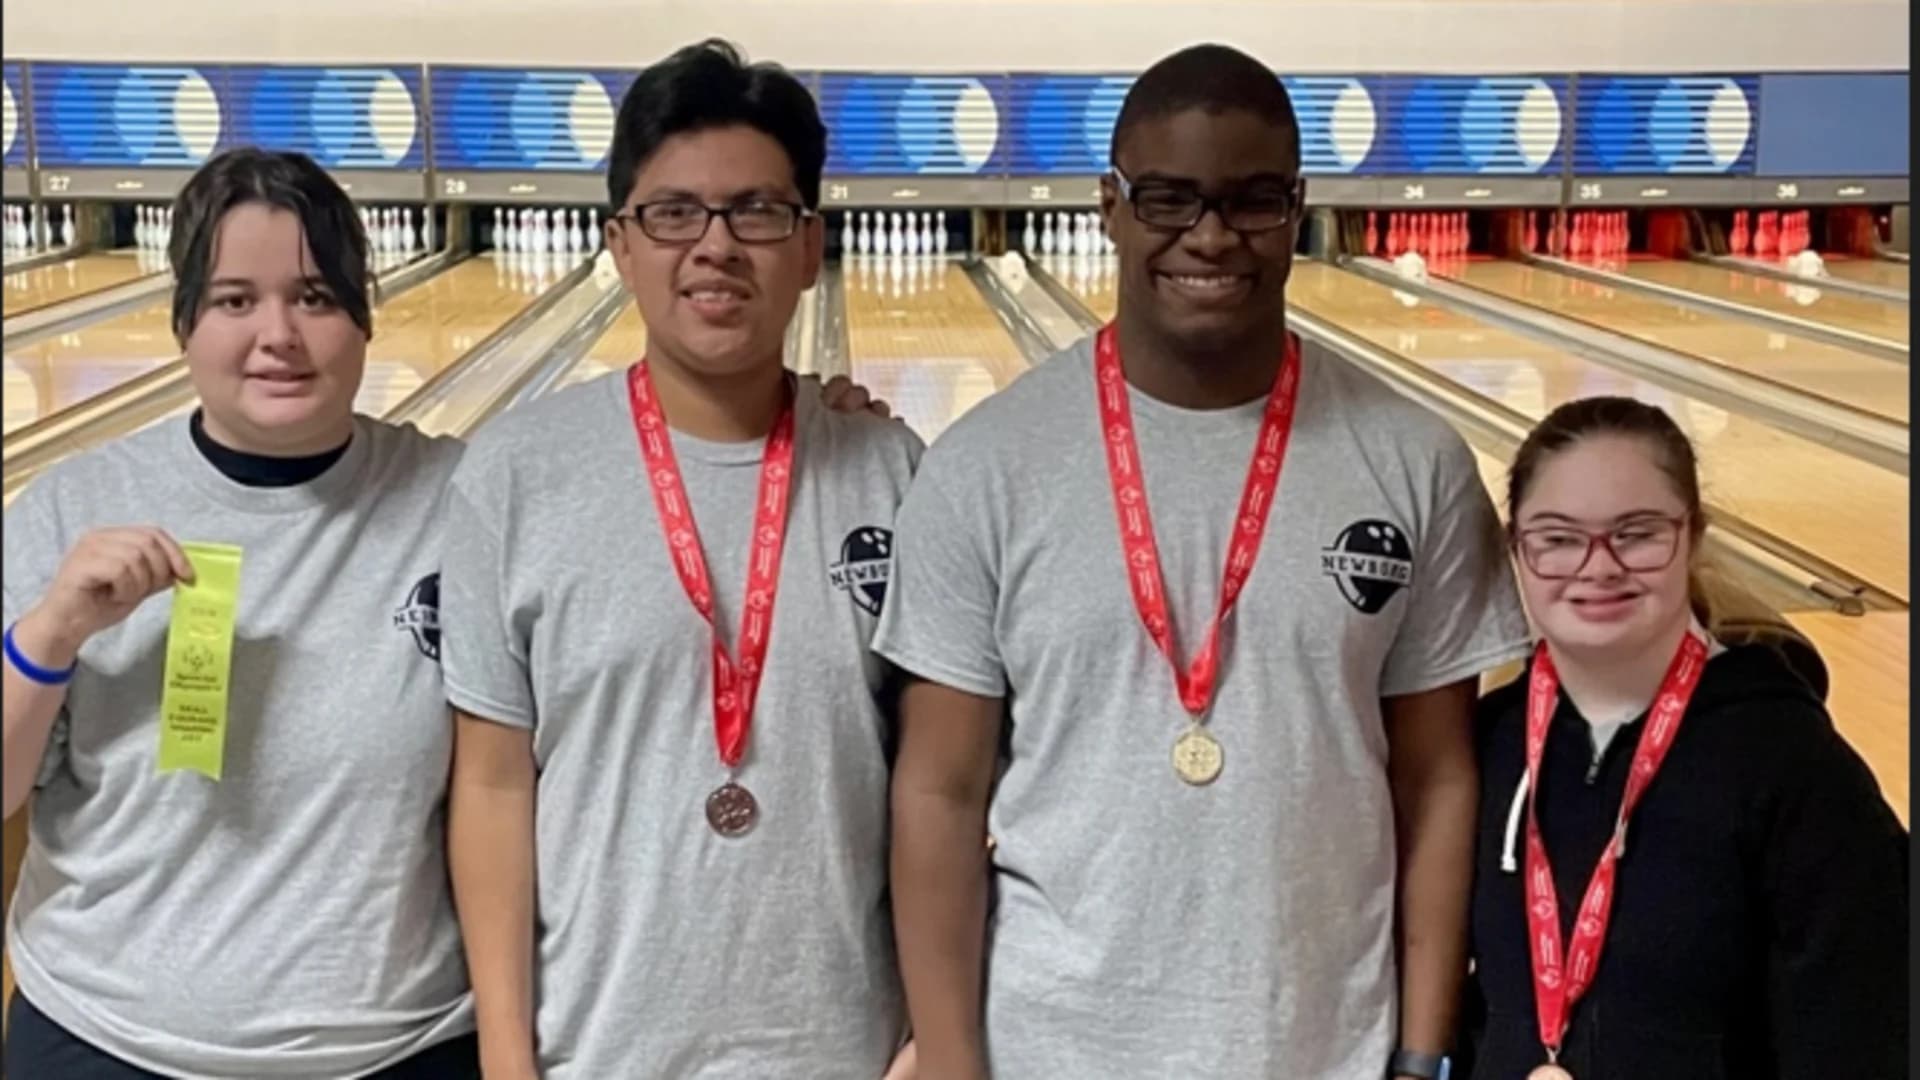 Newburgh athletes compete in Special Olympics Hudson Valley bowling event